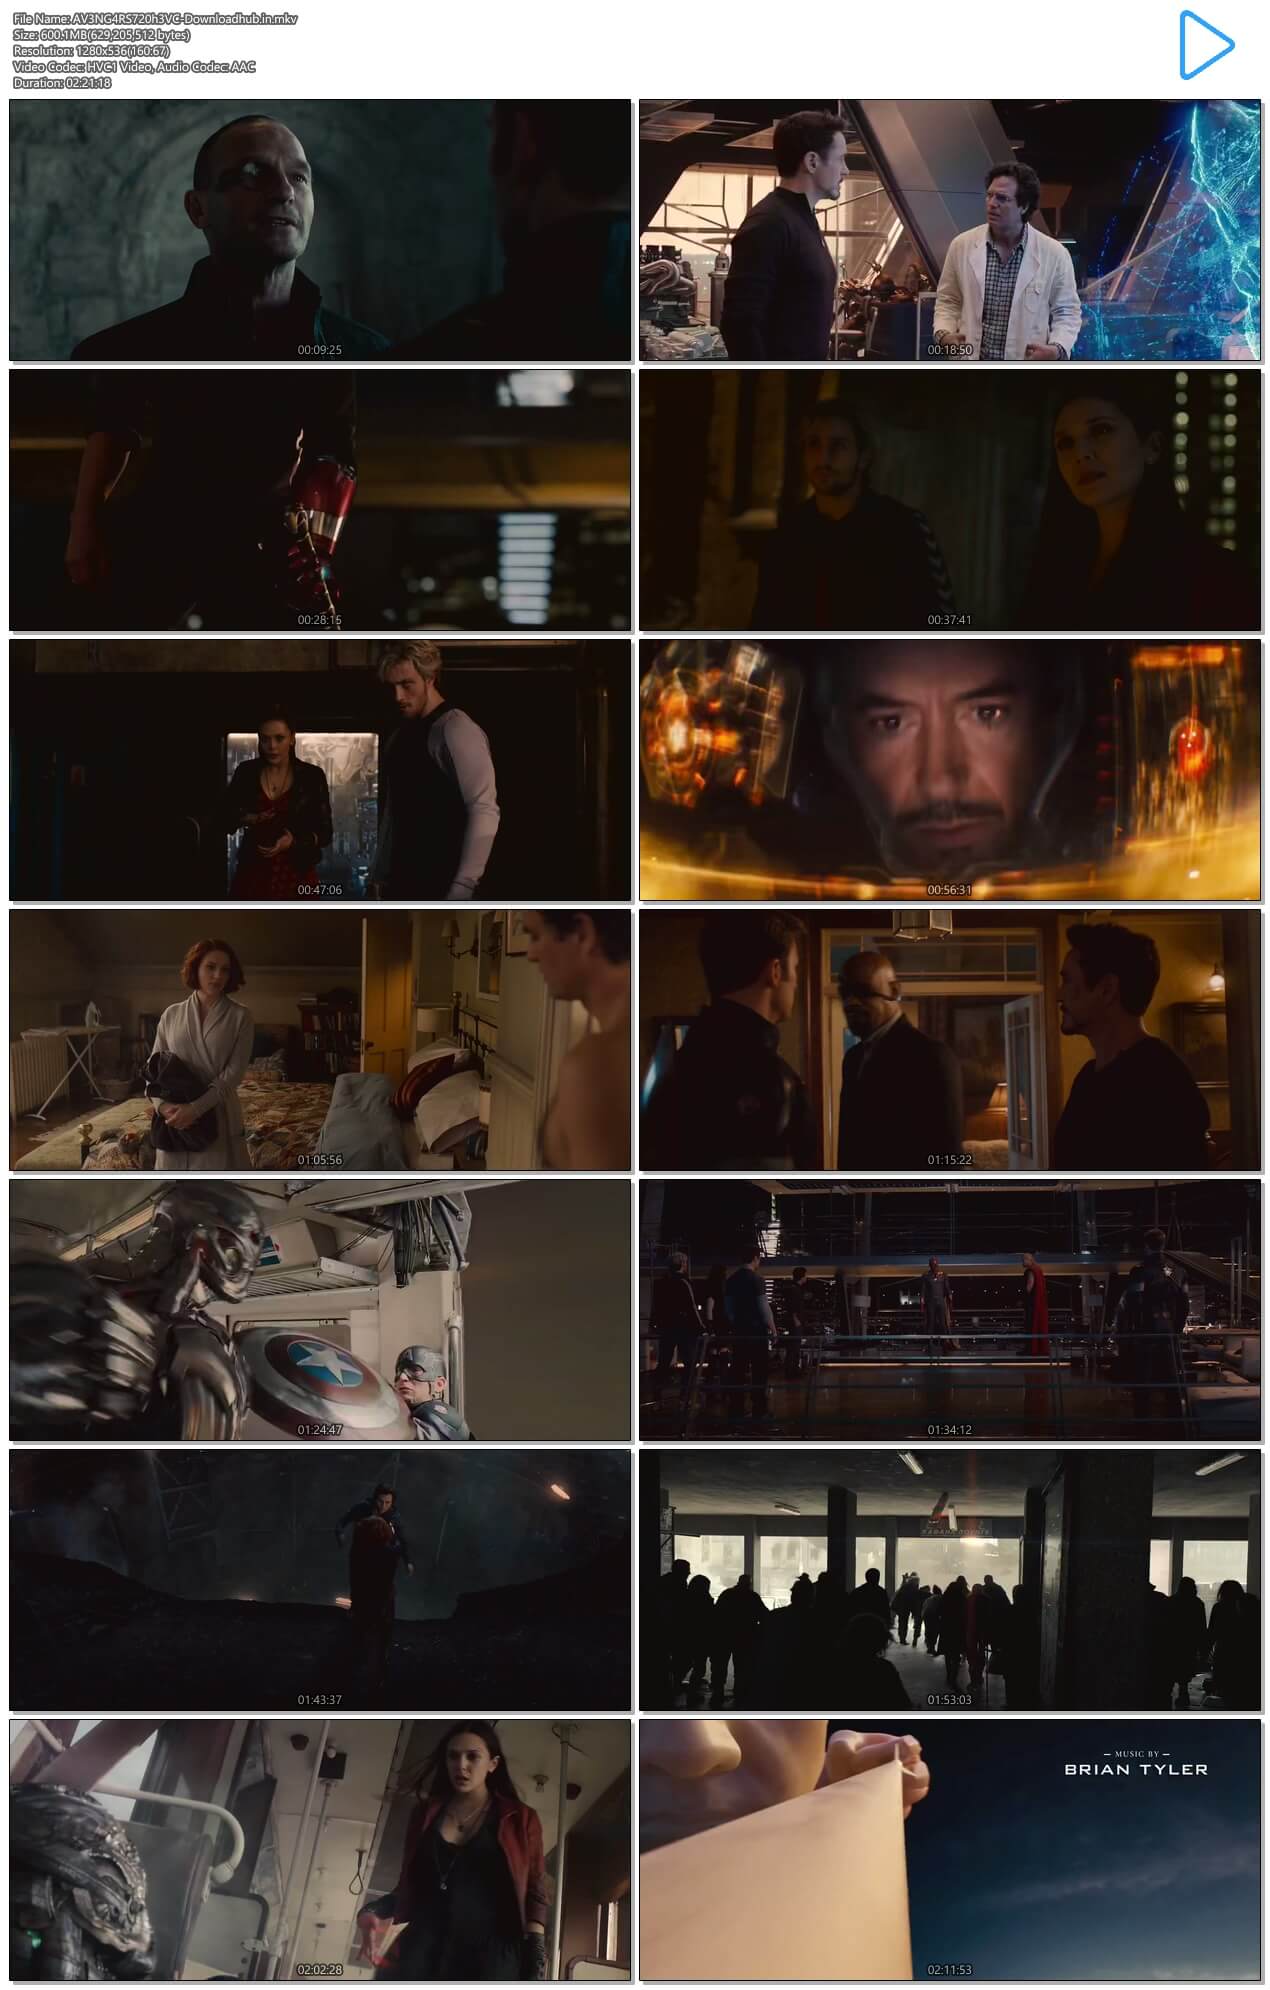 Avengers: Age Of Ultron full movie in hindi 720p download movies